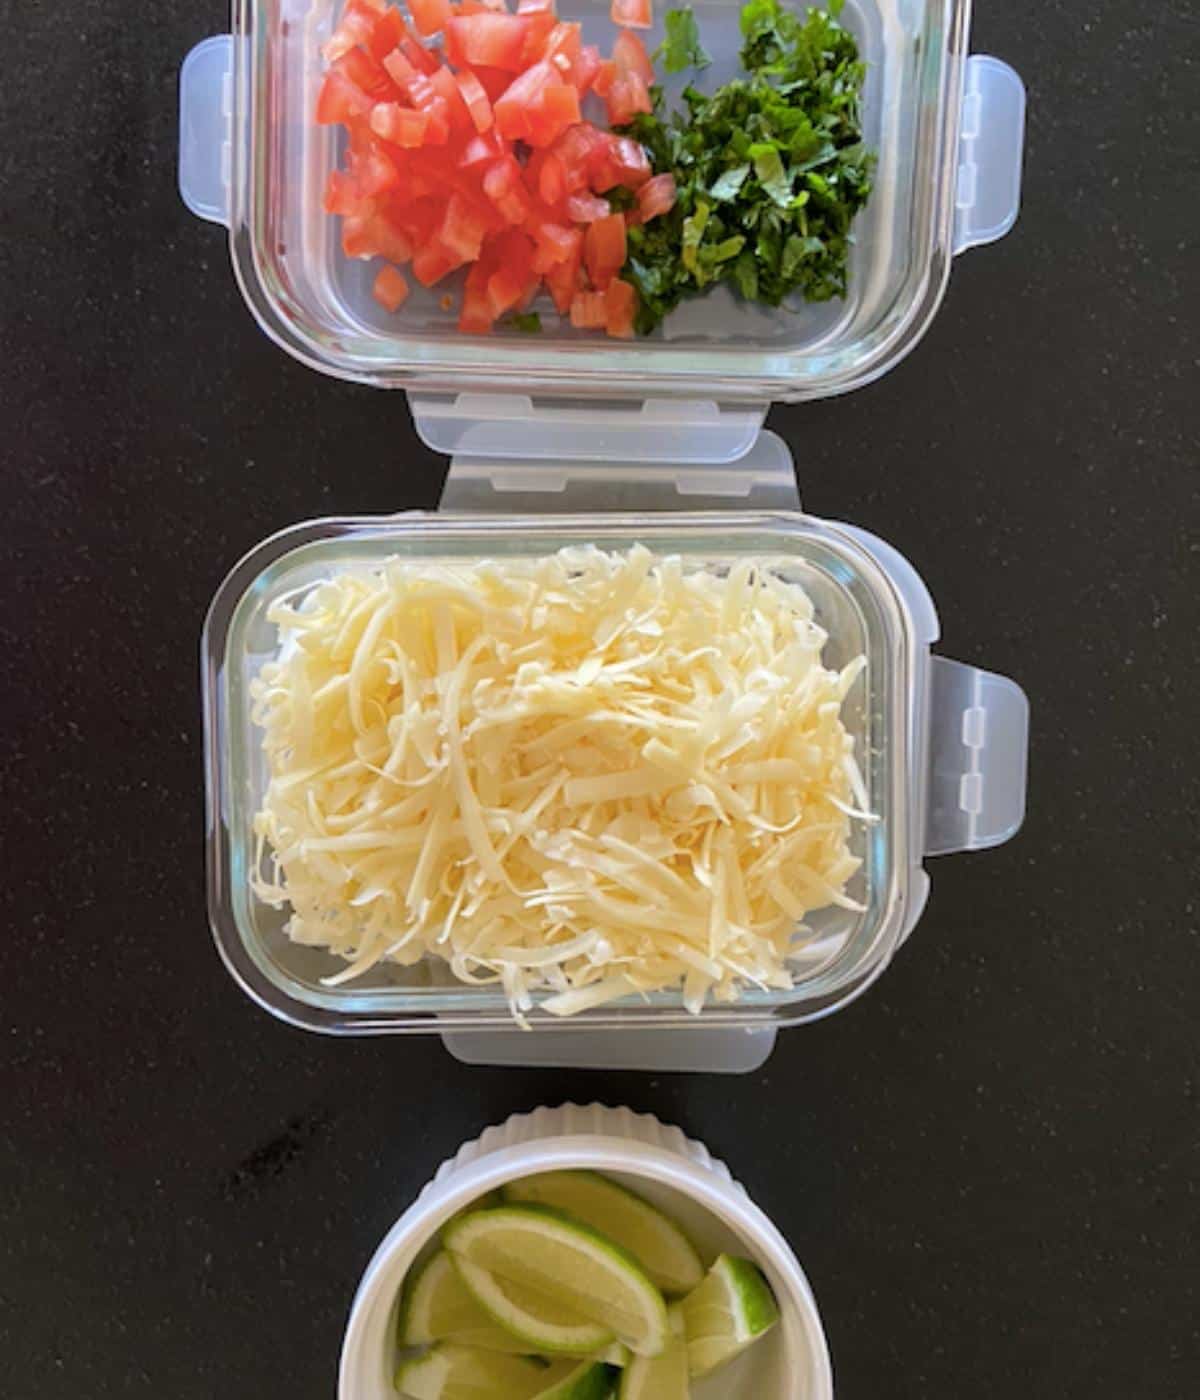 two dishes filled with tomato, cilantro, and cheese with one bowl full of limes.